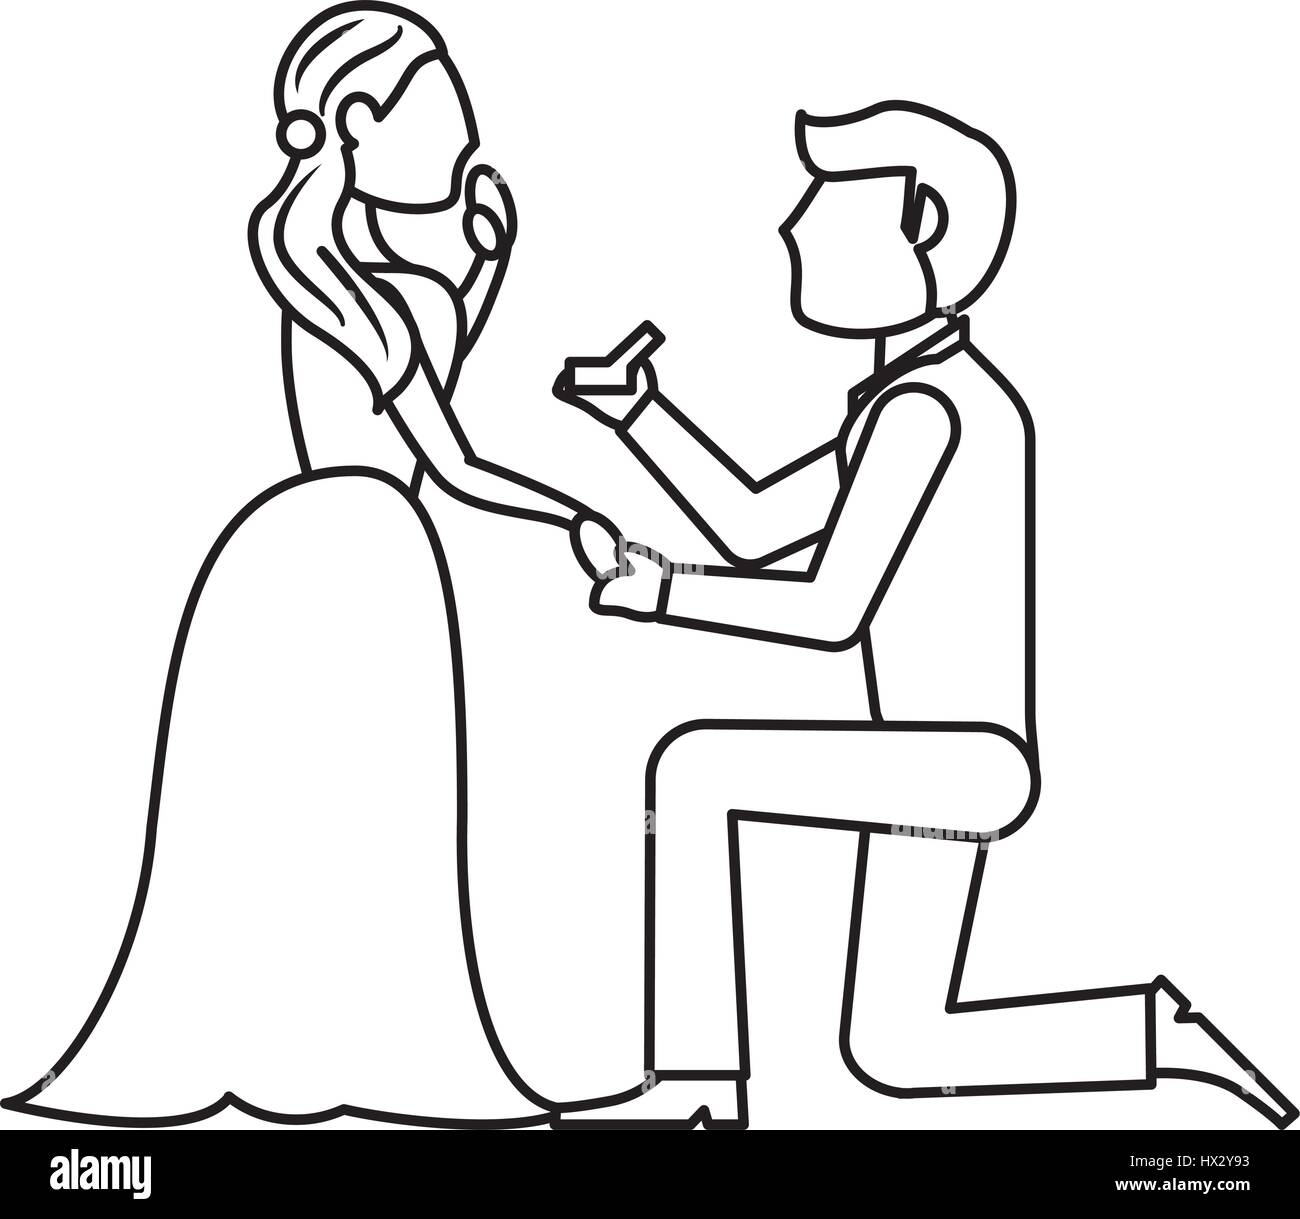 Wedding Ring PNG - Wedding Ring Drawing, Cartoon Wedding Rings, Wedding  Rings Entwined, Wedding Rings And Cross. - CleanPNG / KissPNG